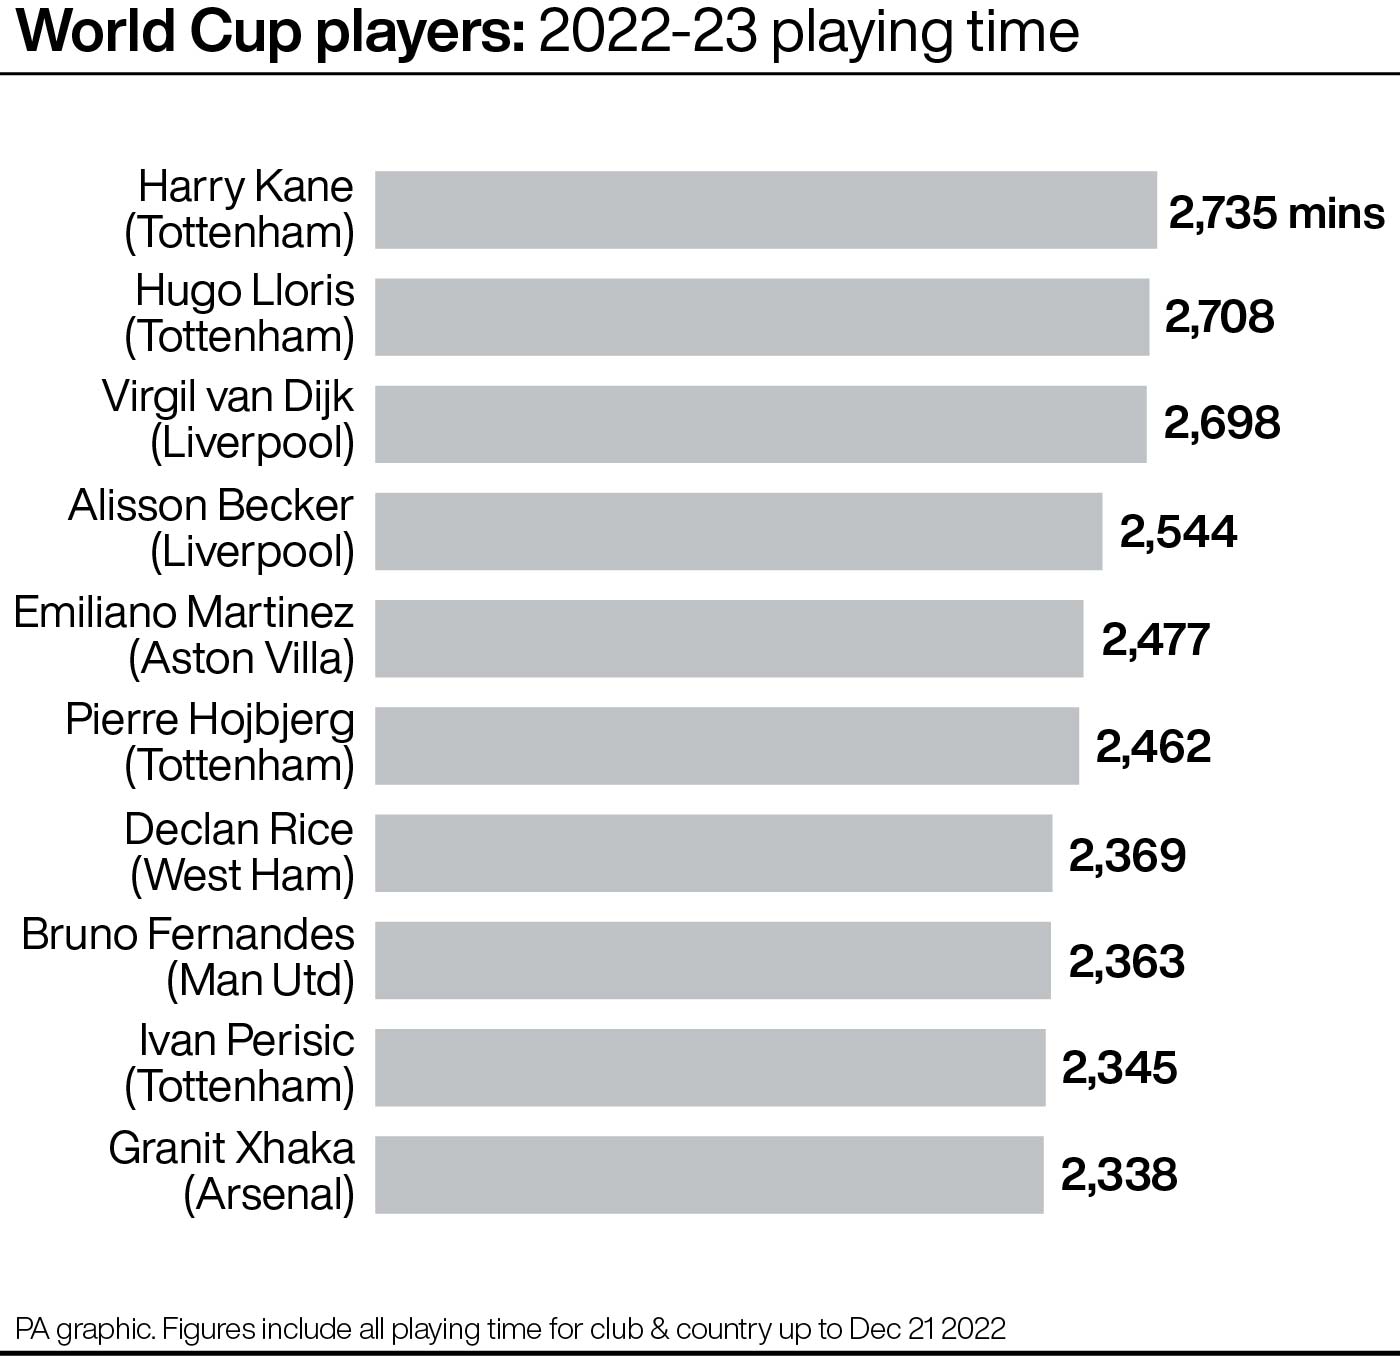 Premier League players at the World Cup: 2022-23 playing time